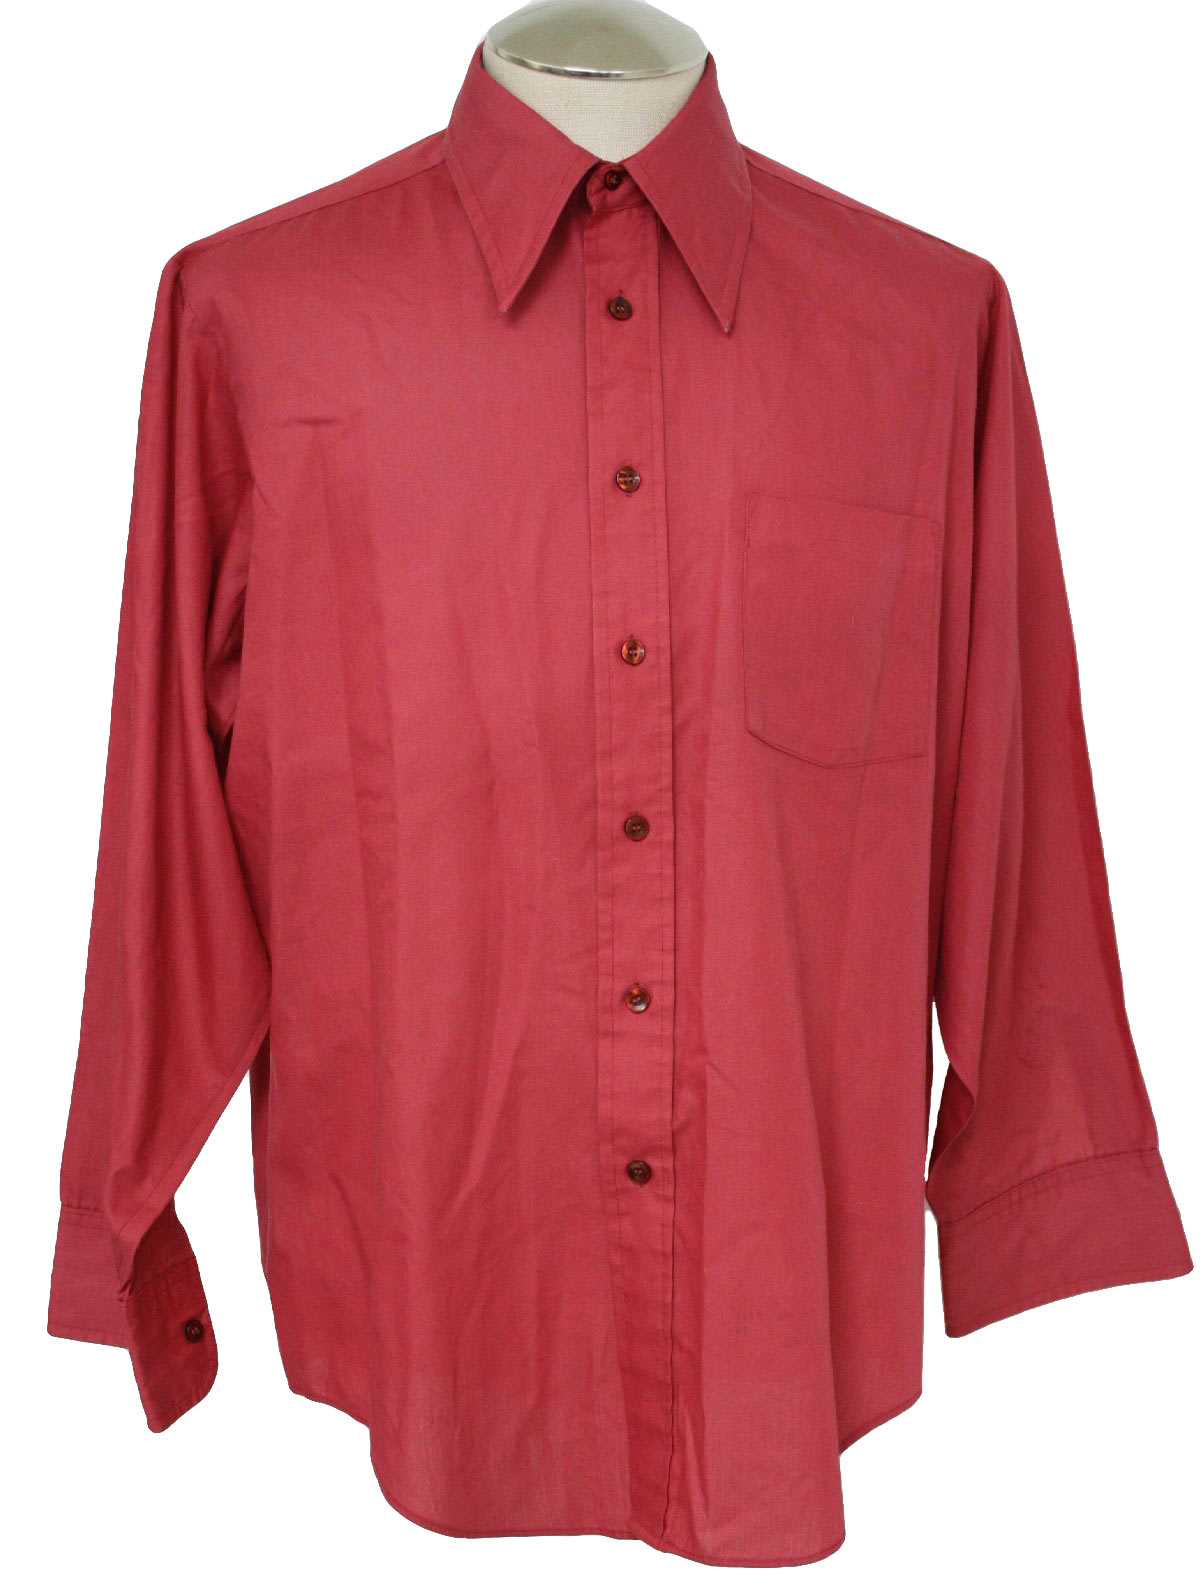 JC Penney 70's Vintage Shirt: Early 70s -JC Penney- Mens magenta cotton ...